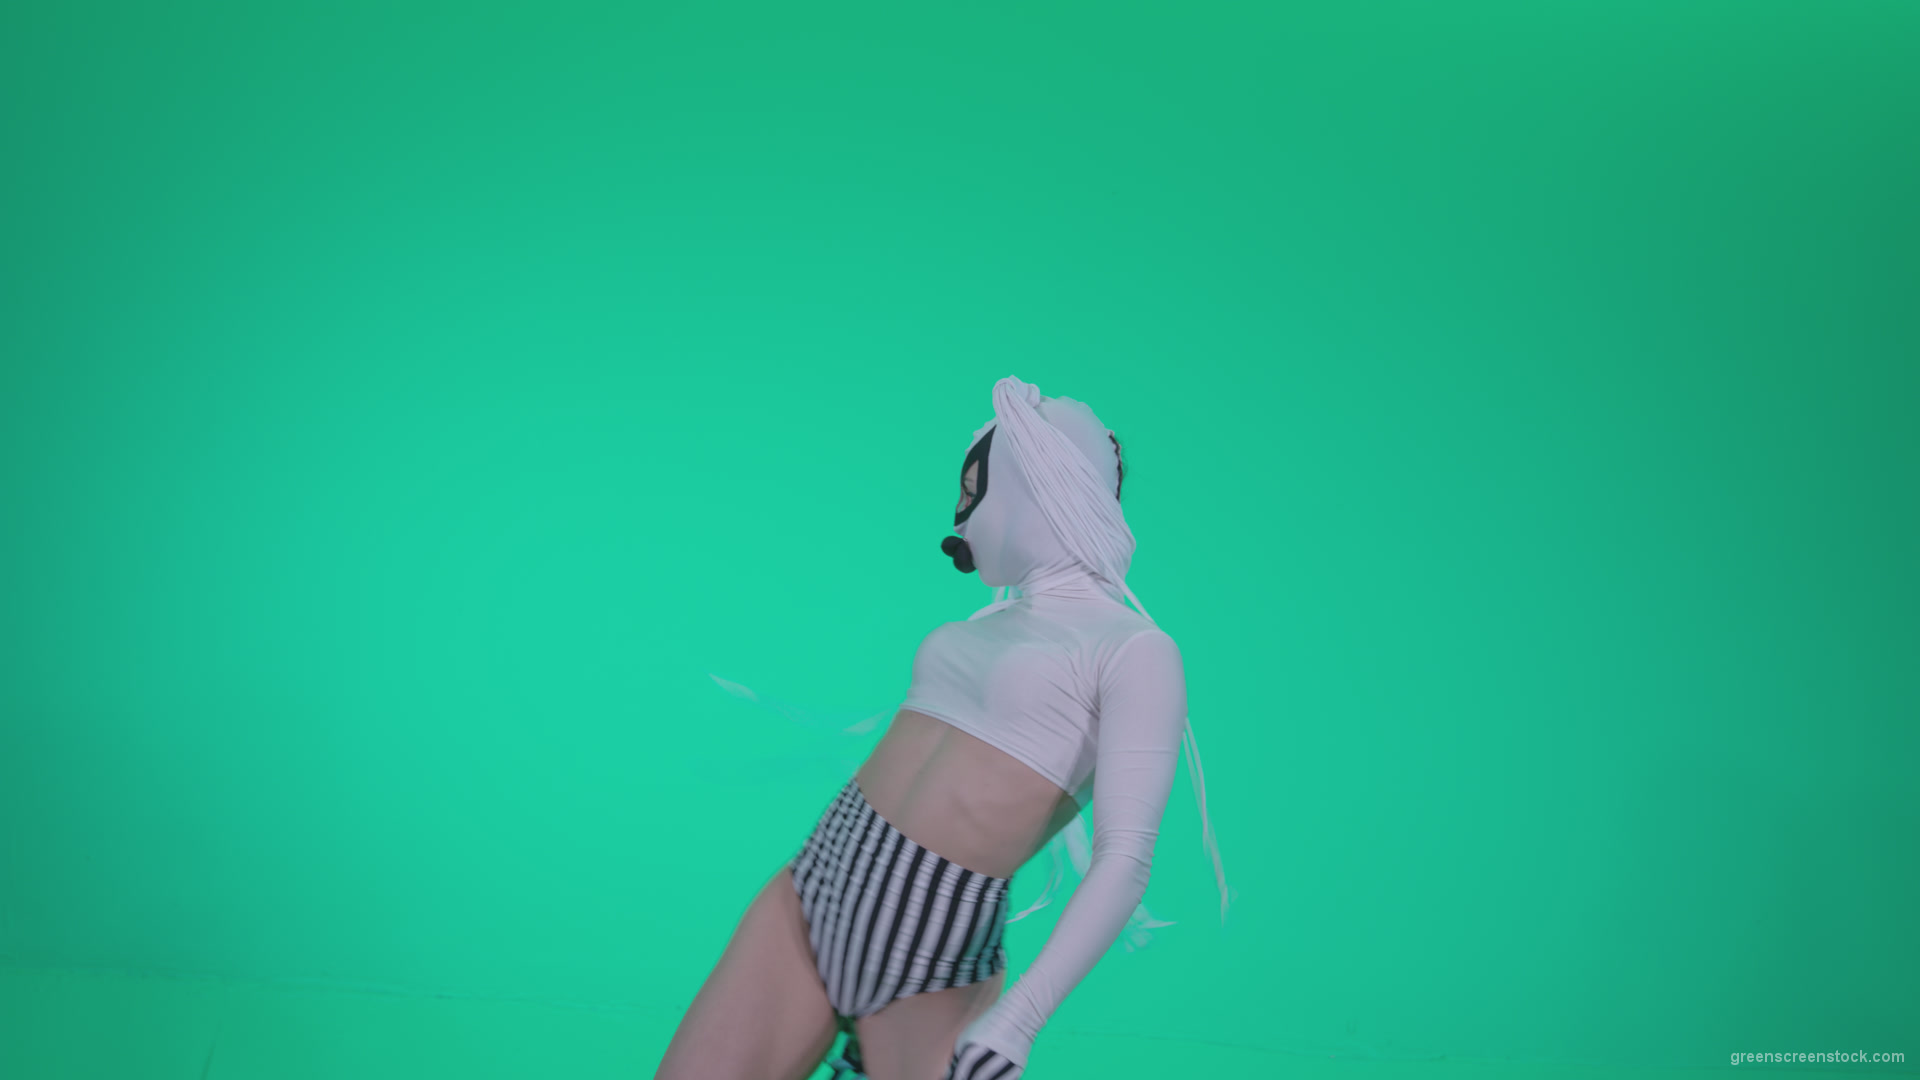 Go-go-Dancer-with-Latex-Top-t9-Green-Screen-Video-Footage_007 Green Screen Stock